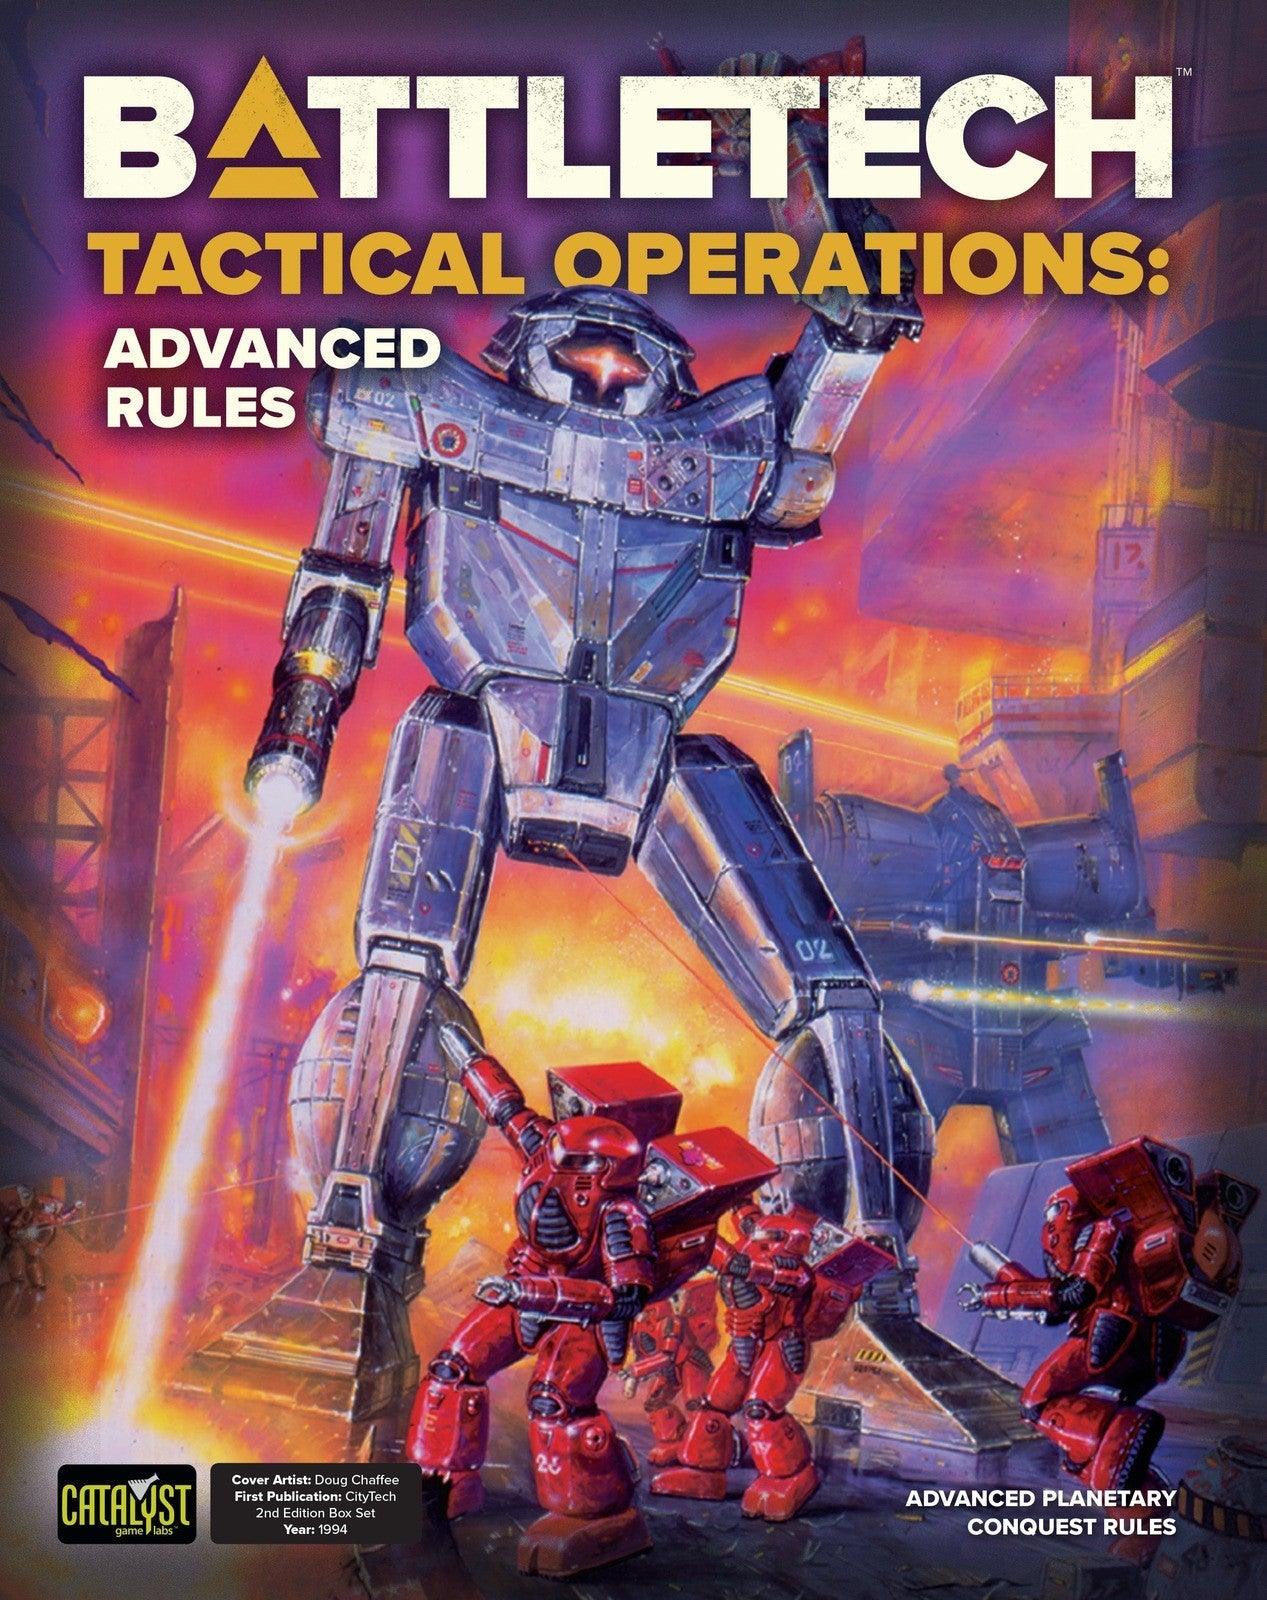 BattleTech Tactical Operations - Advanced Rules Tabletop Gaming / Role Playing Games by Catalyst Game Labs | Titan Pop Culture